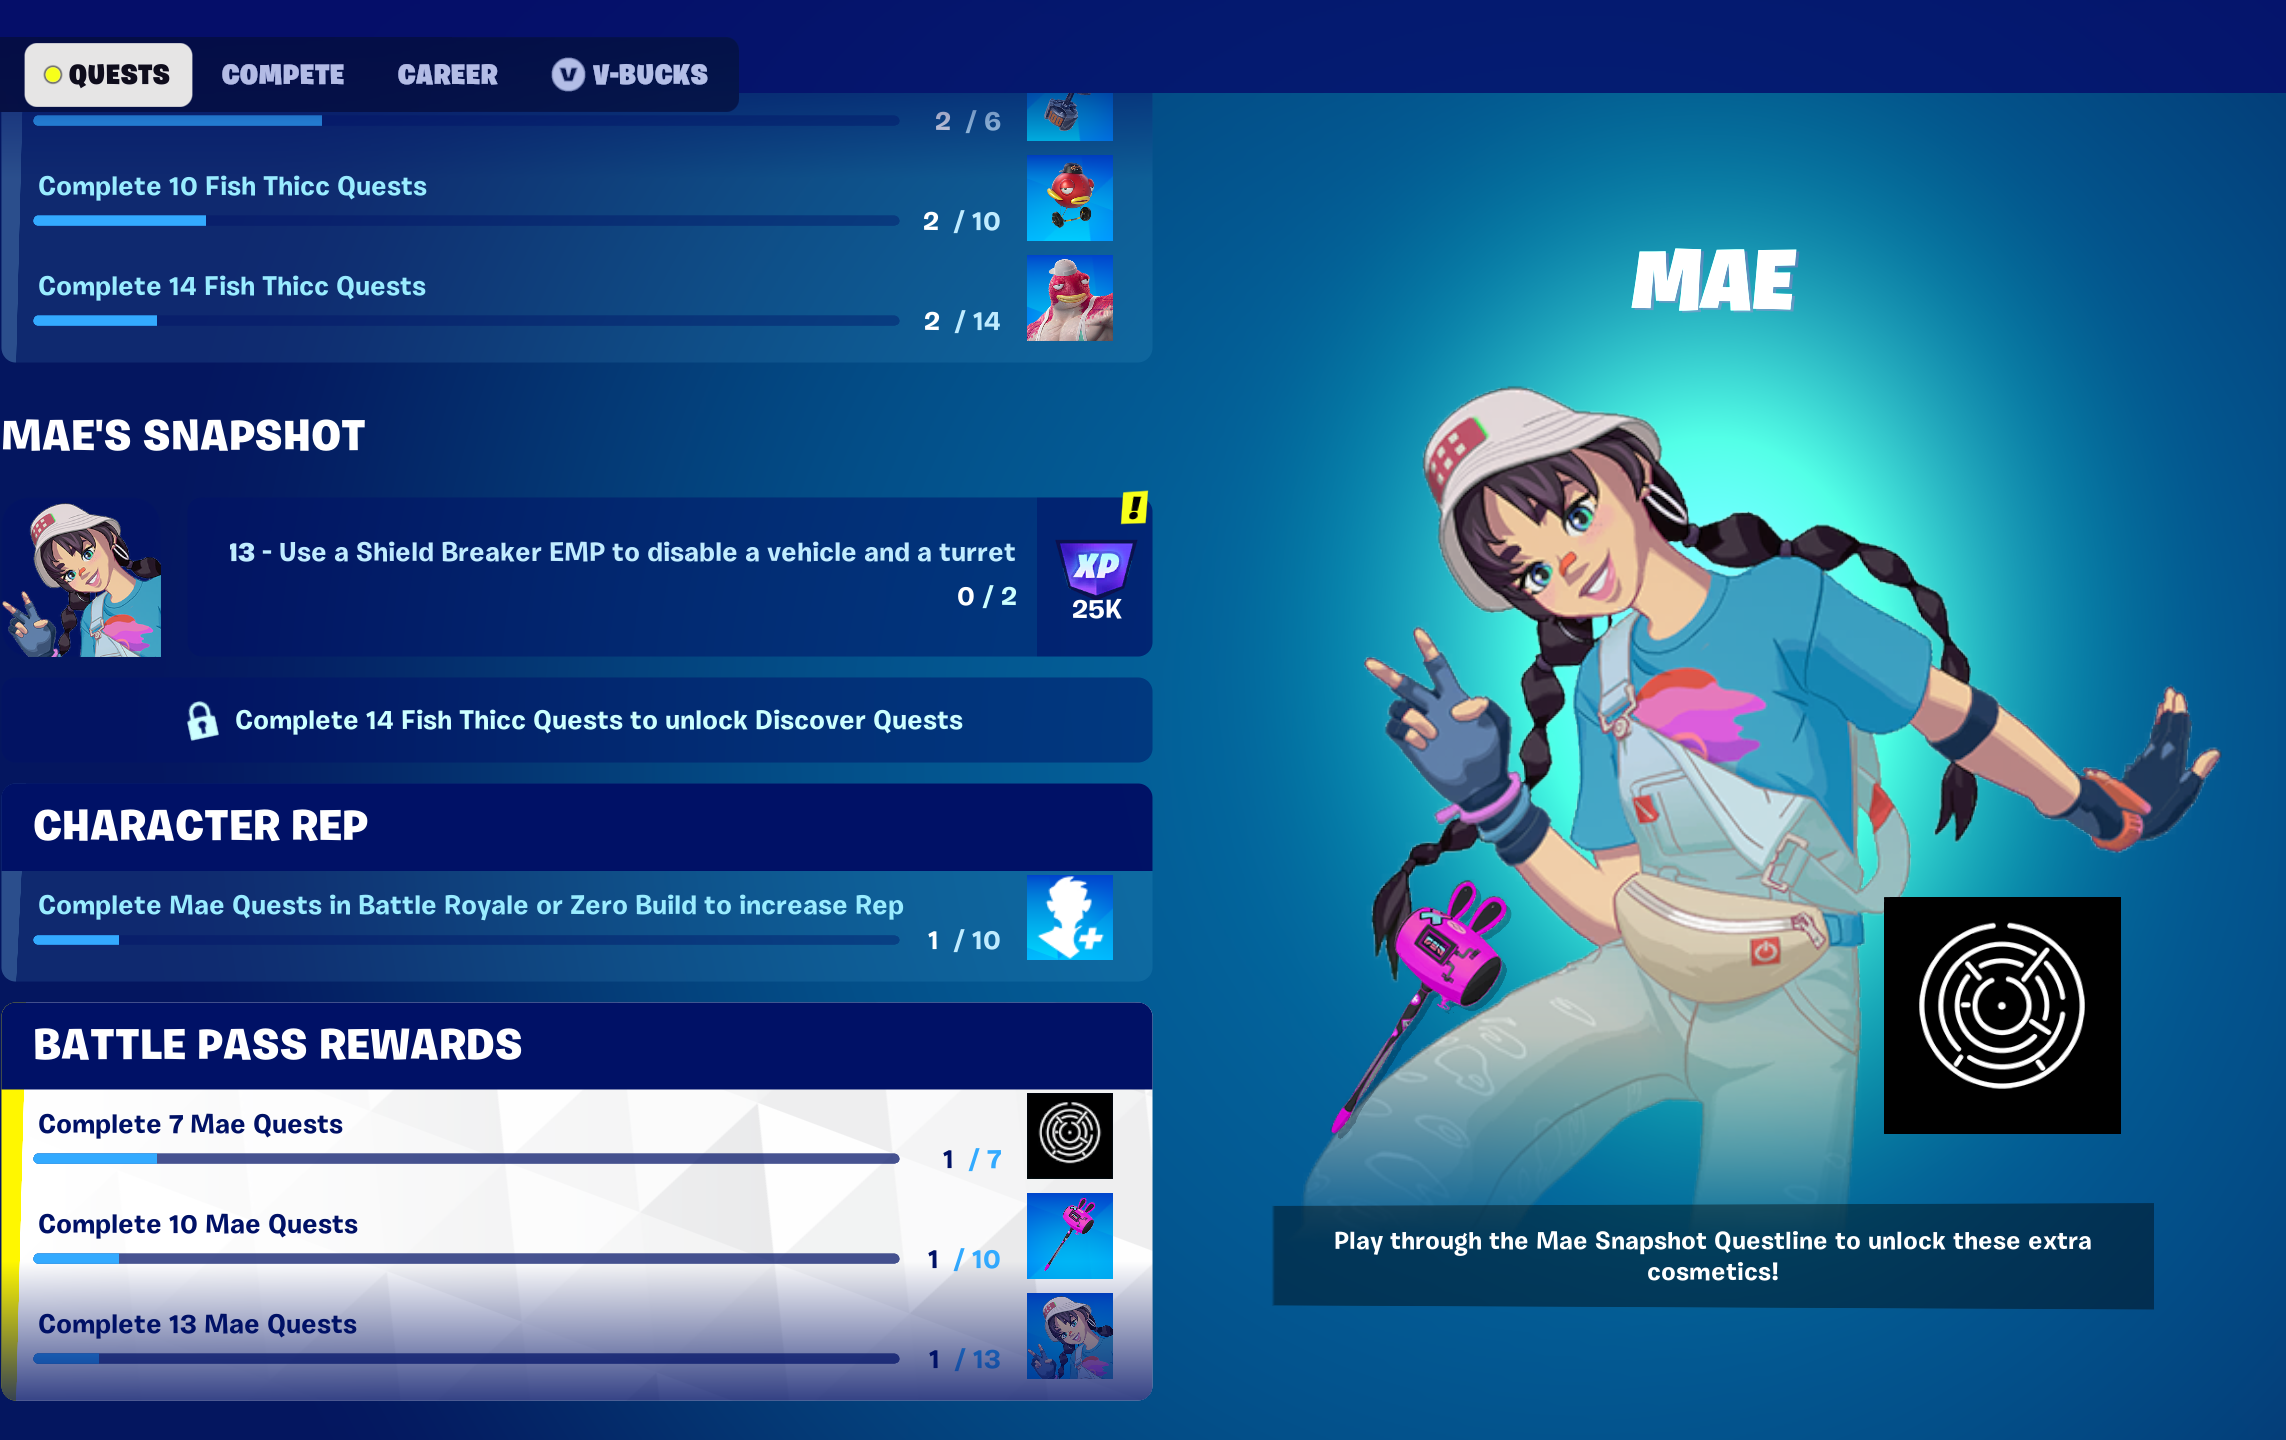 Chapter 4 Season 4: Mae Snapshot Quests Available Now